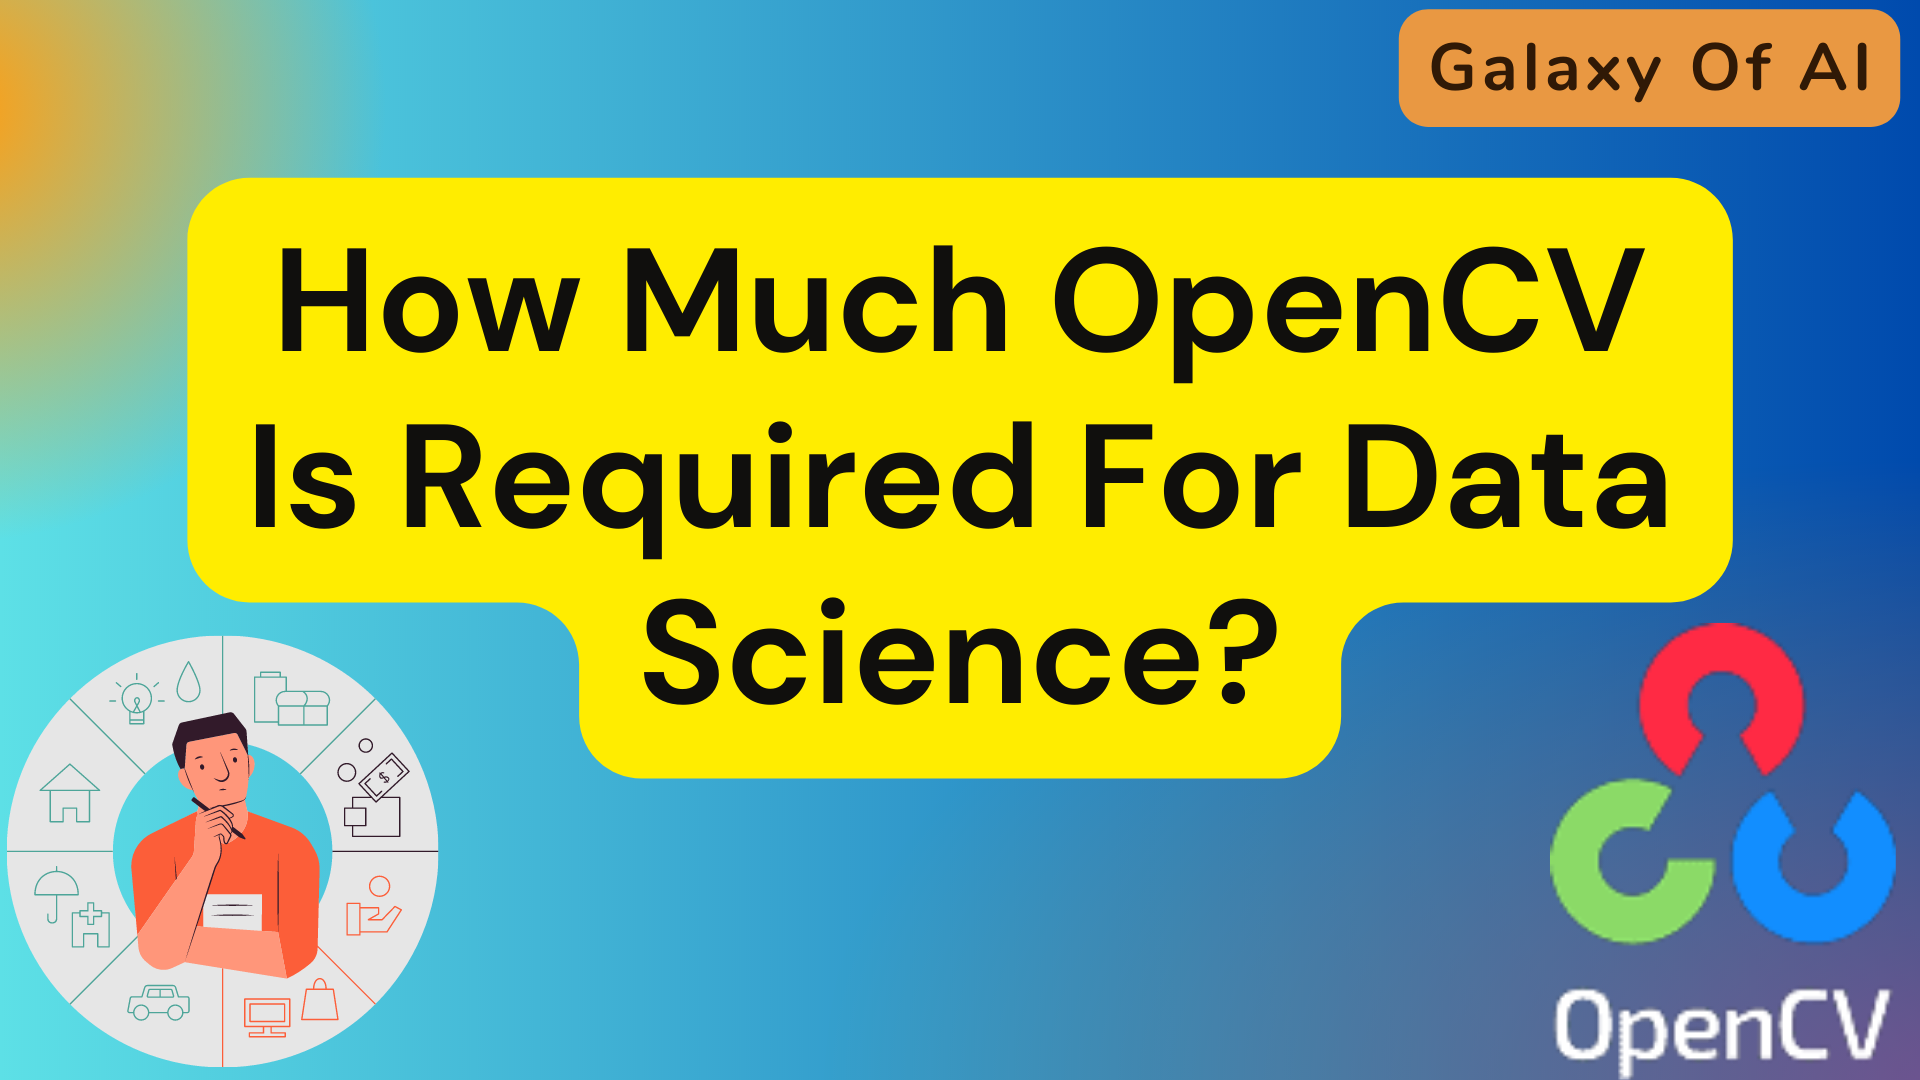 How Much OpenCV Is Required For Data Science?